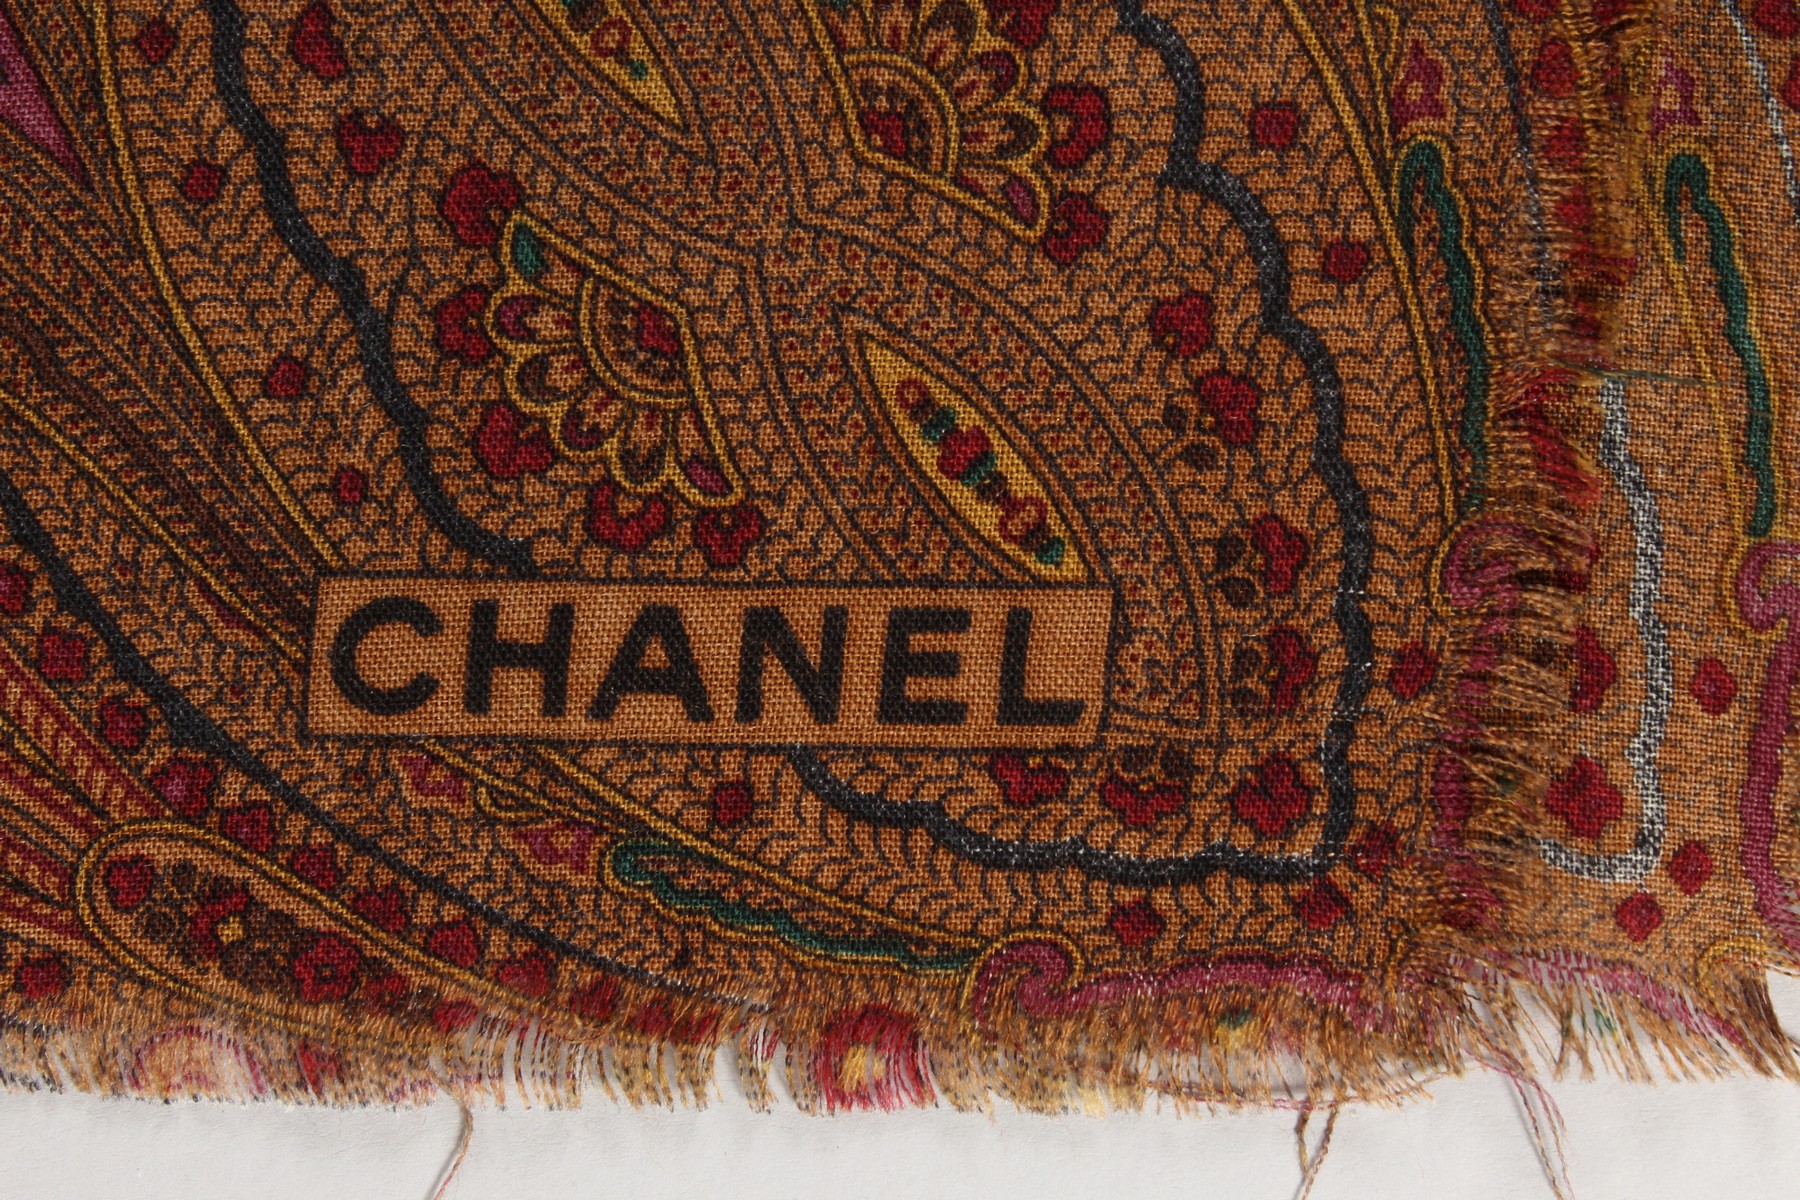 A VINTAGE CHANEL SILK SCARF, RED PAISLEY DESIGN WITH ROSES. - Image 2 of 2